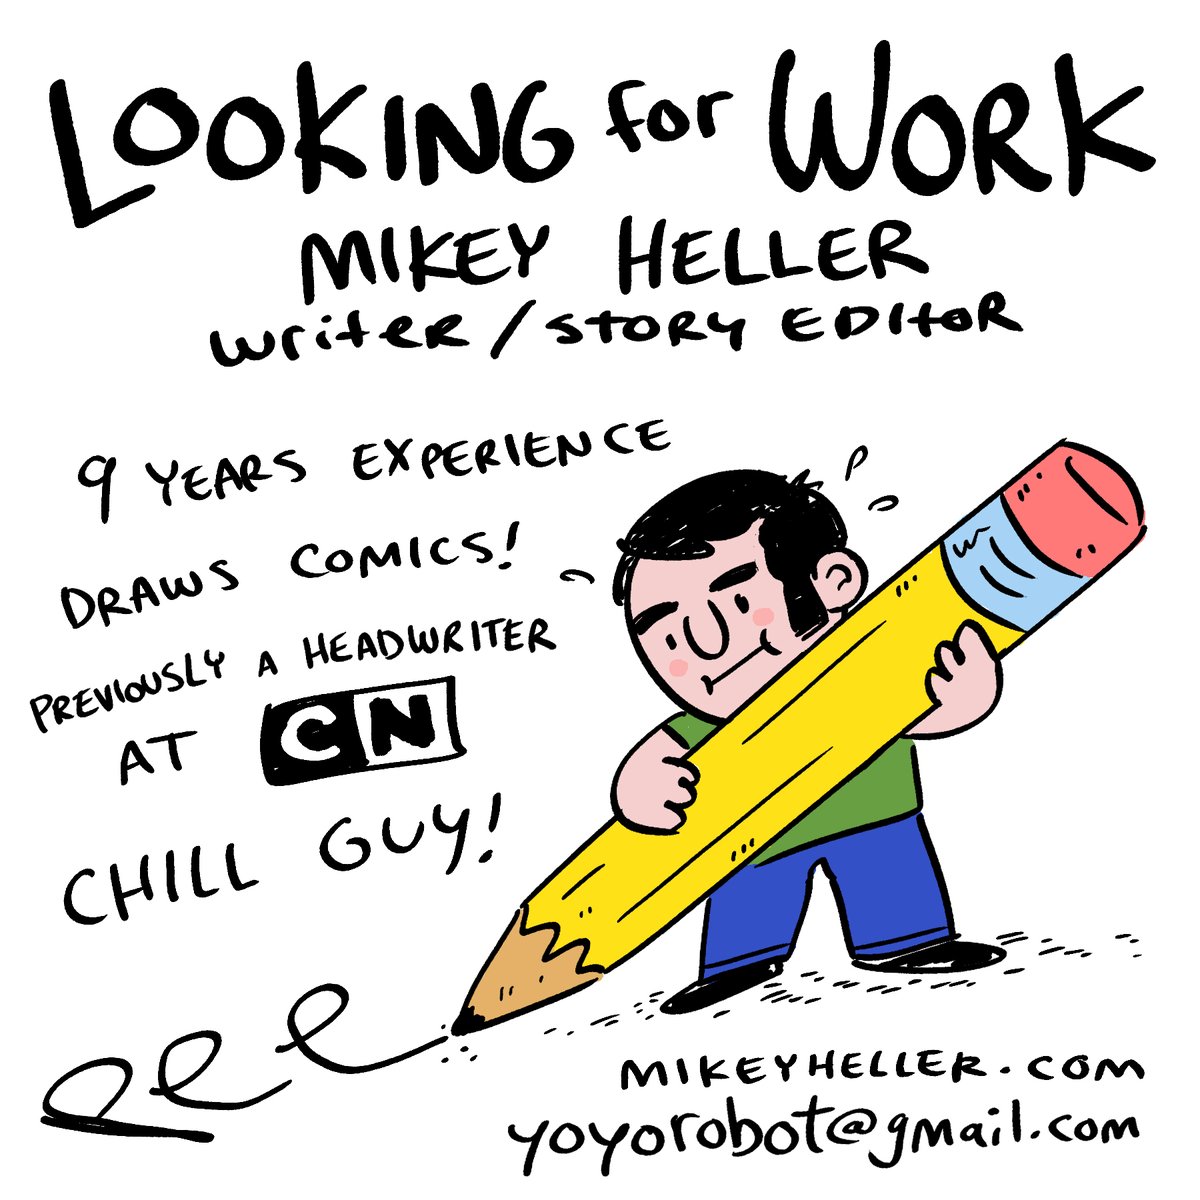 I’m looking for work! Yeehaw! My email is yoyorobot@gmail.com. Reach out with any leads, opportunities, or if you just want to chat as friends!